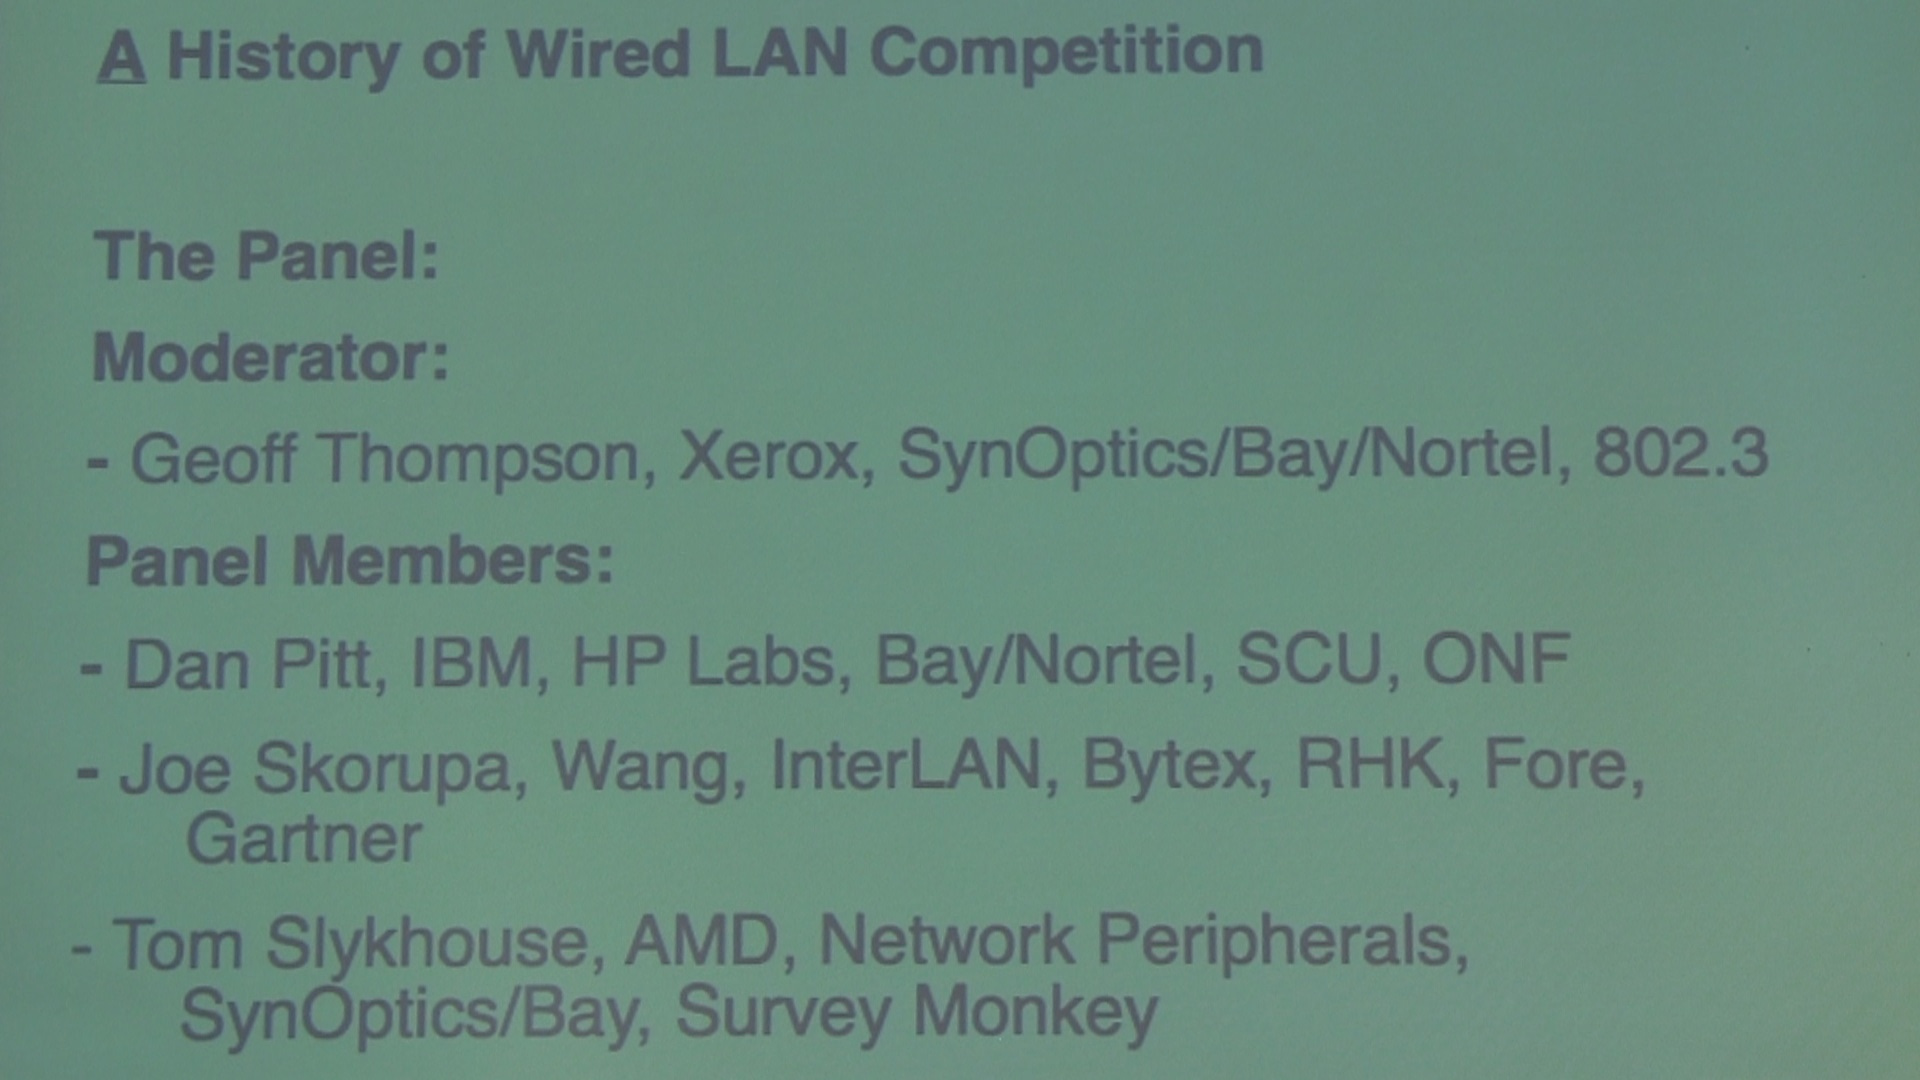 History of Wired LAN Competition – Complete Playlist (1 hour, 26 minutes)